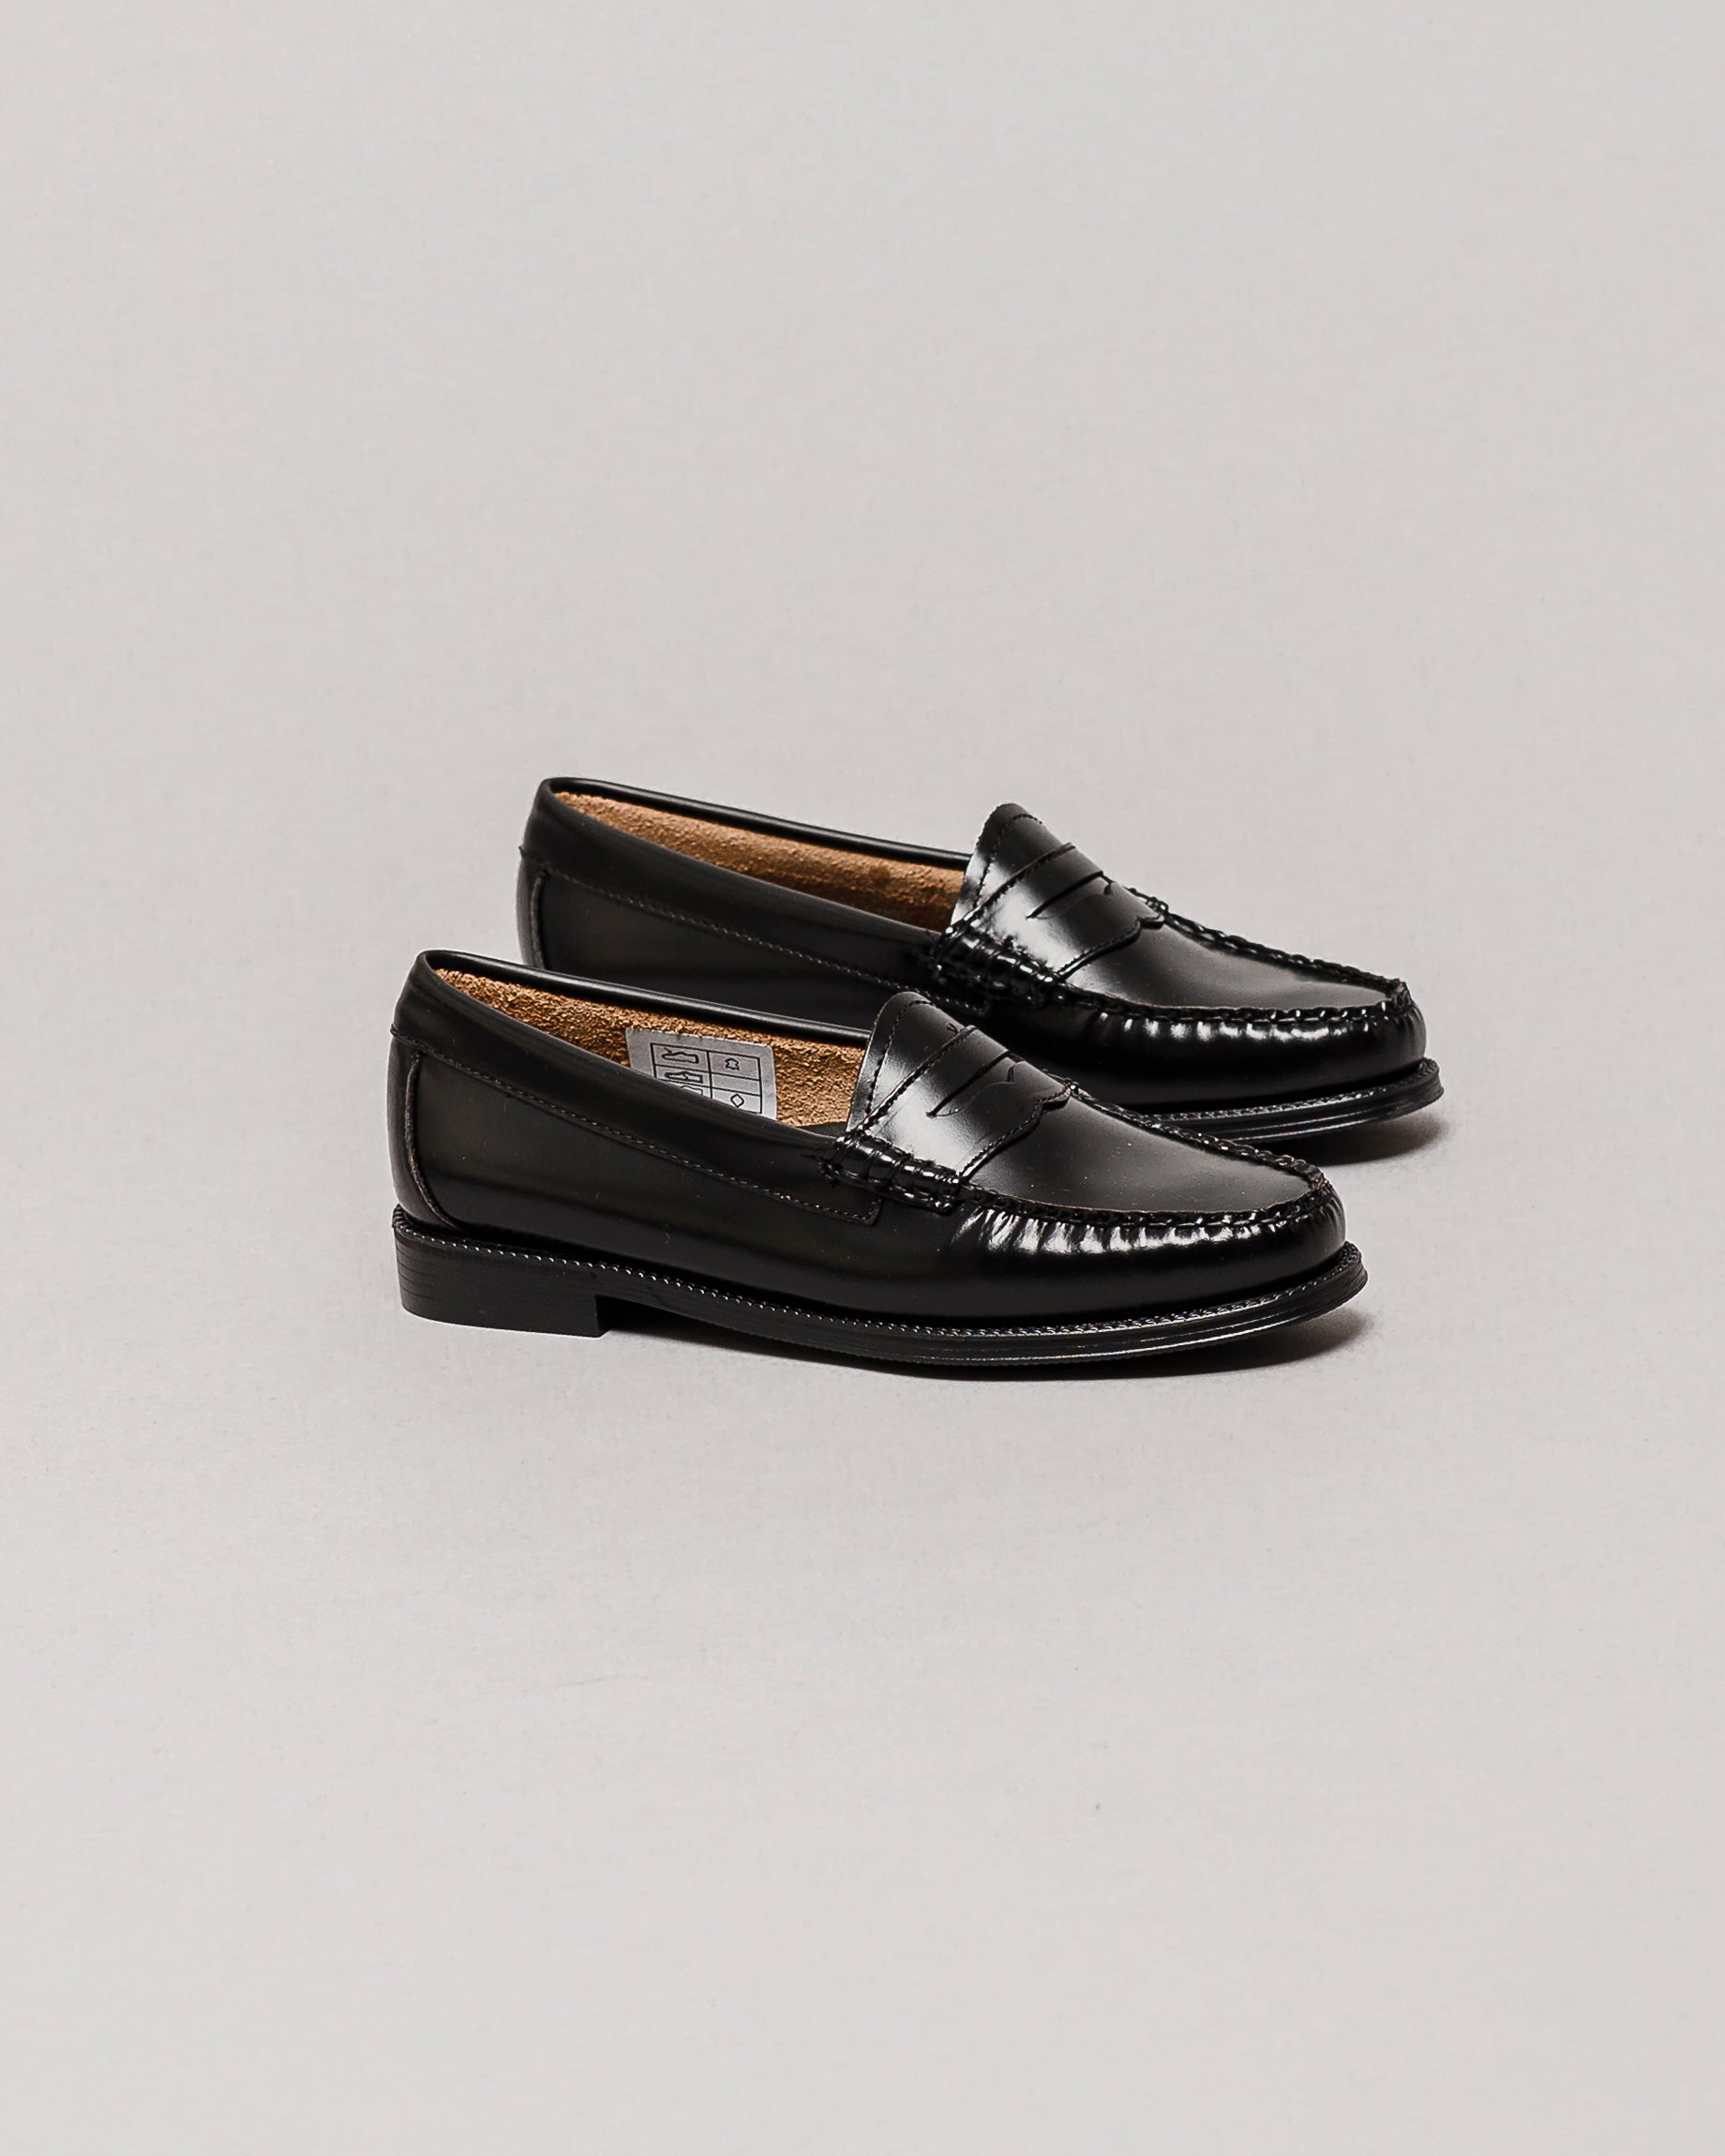 G.H Bass & Co. Weejuns Black Penny Loafers